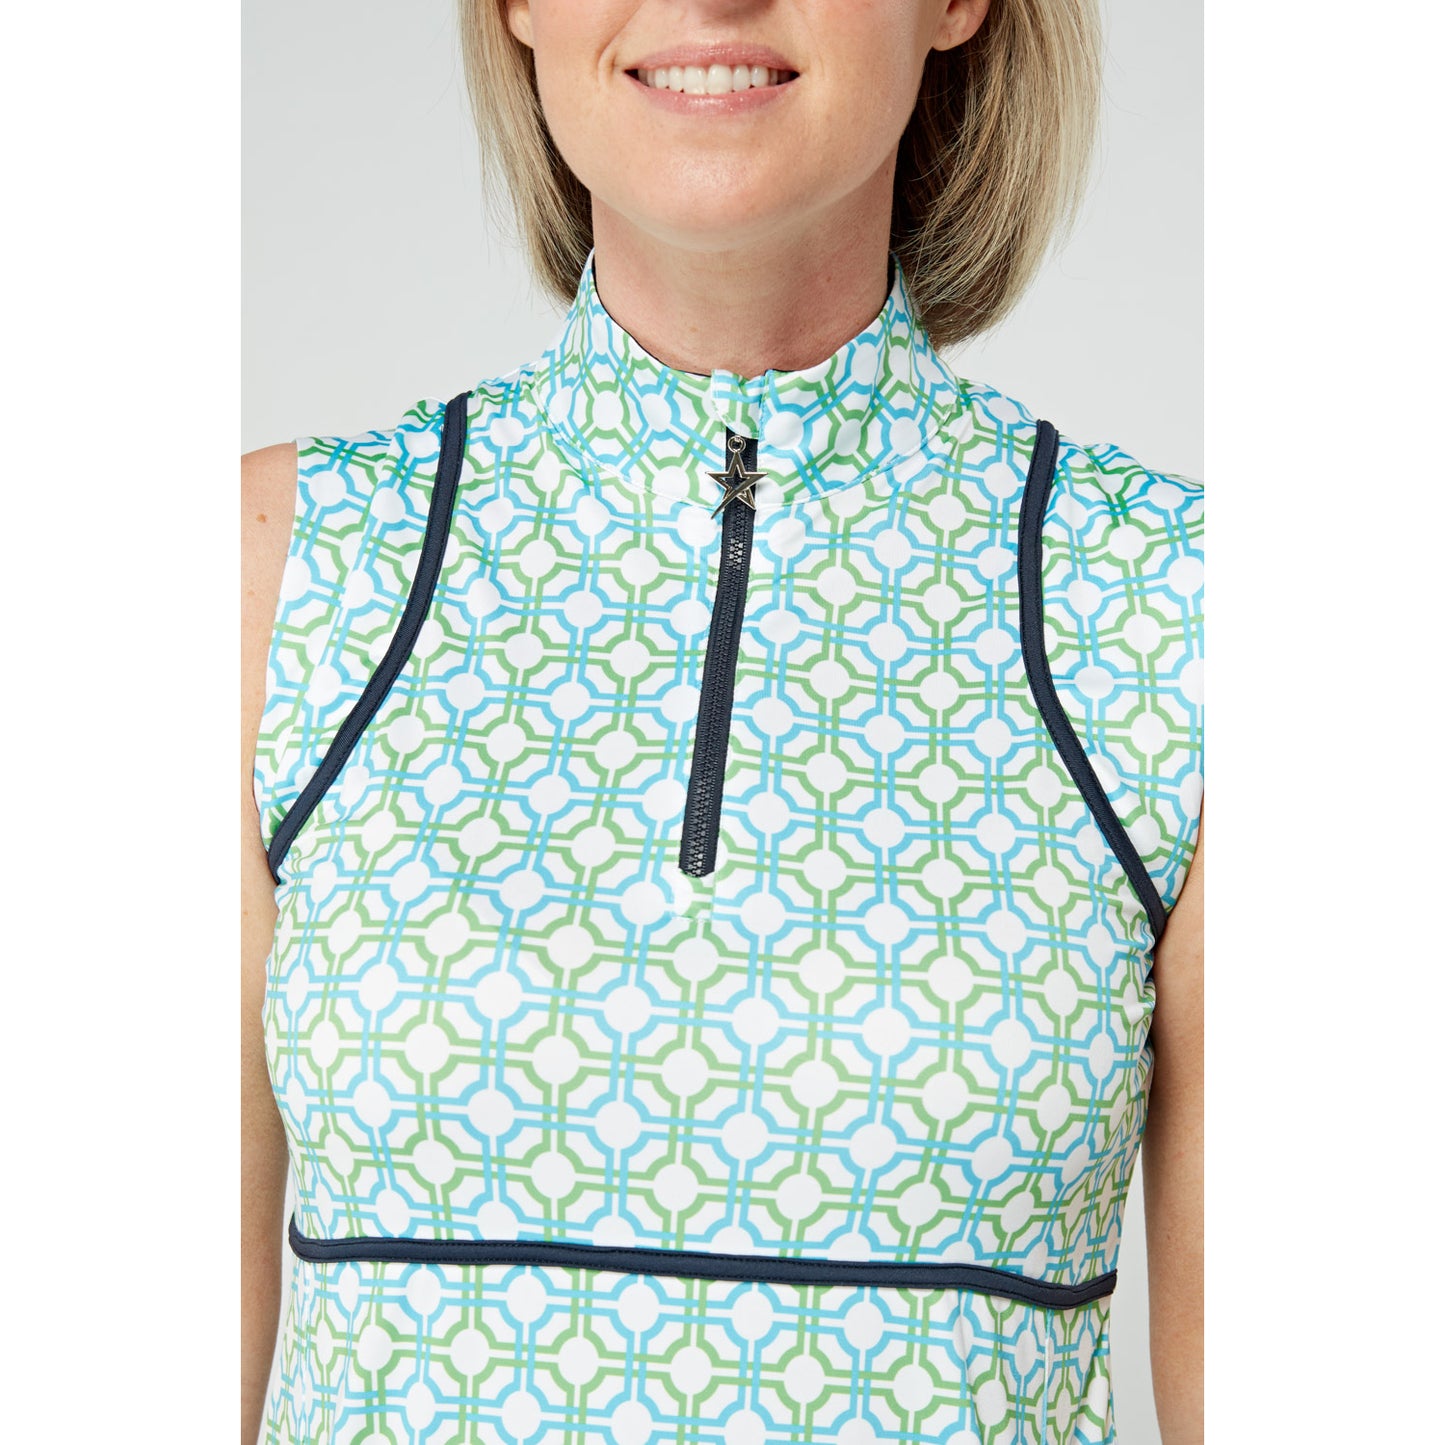 Swing Out Sister Ladies Sleeveless Golf Dress in Dazzling Blue and Emerald Mosaic Pattern